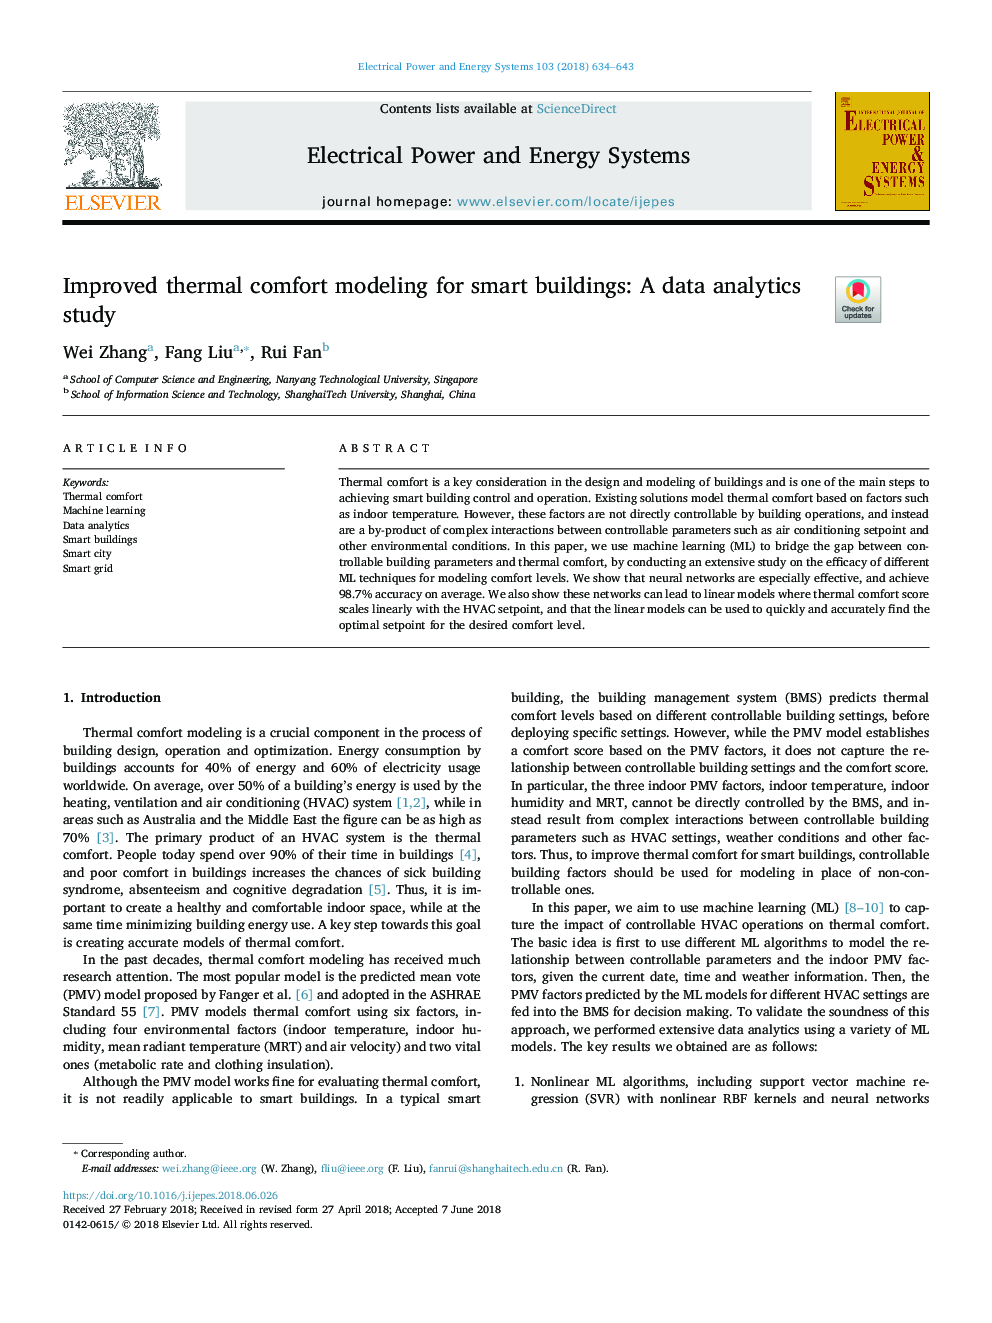 Improved thermal comfort modeling for smart buildings: A data analytics study